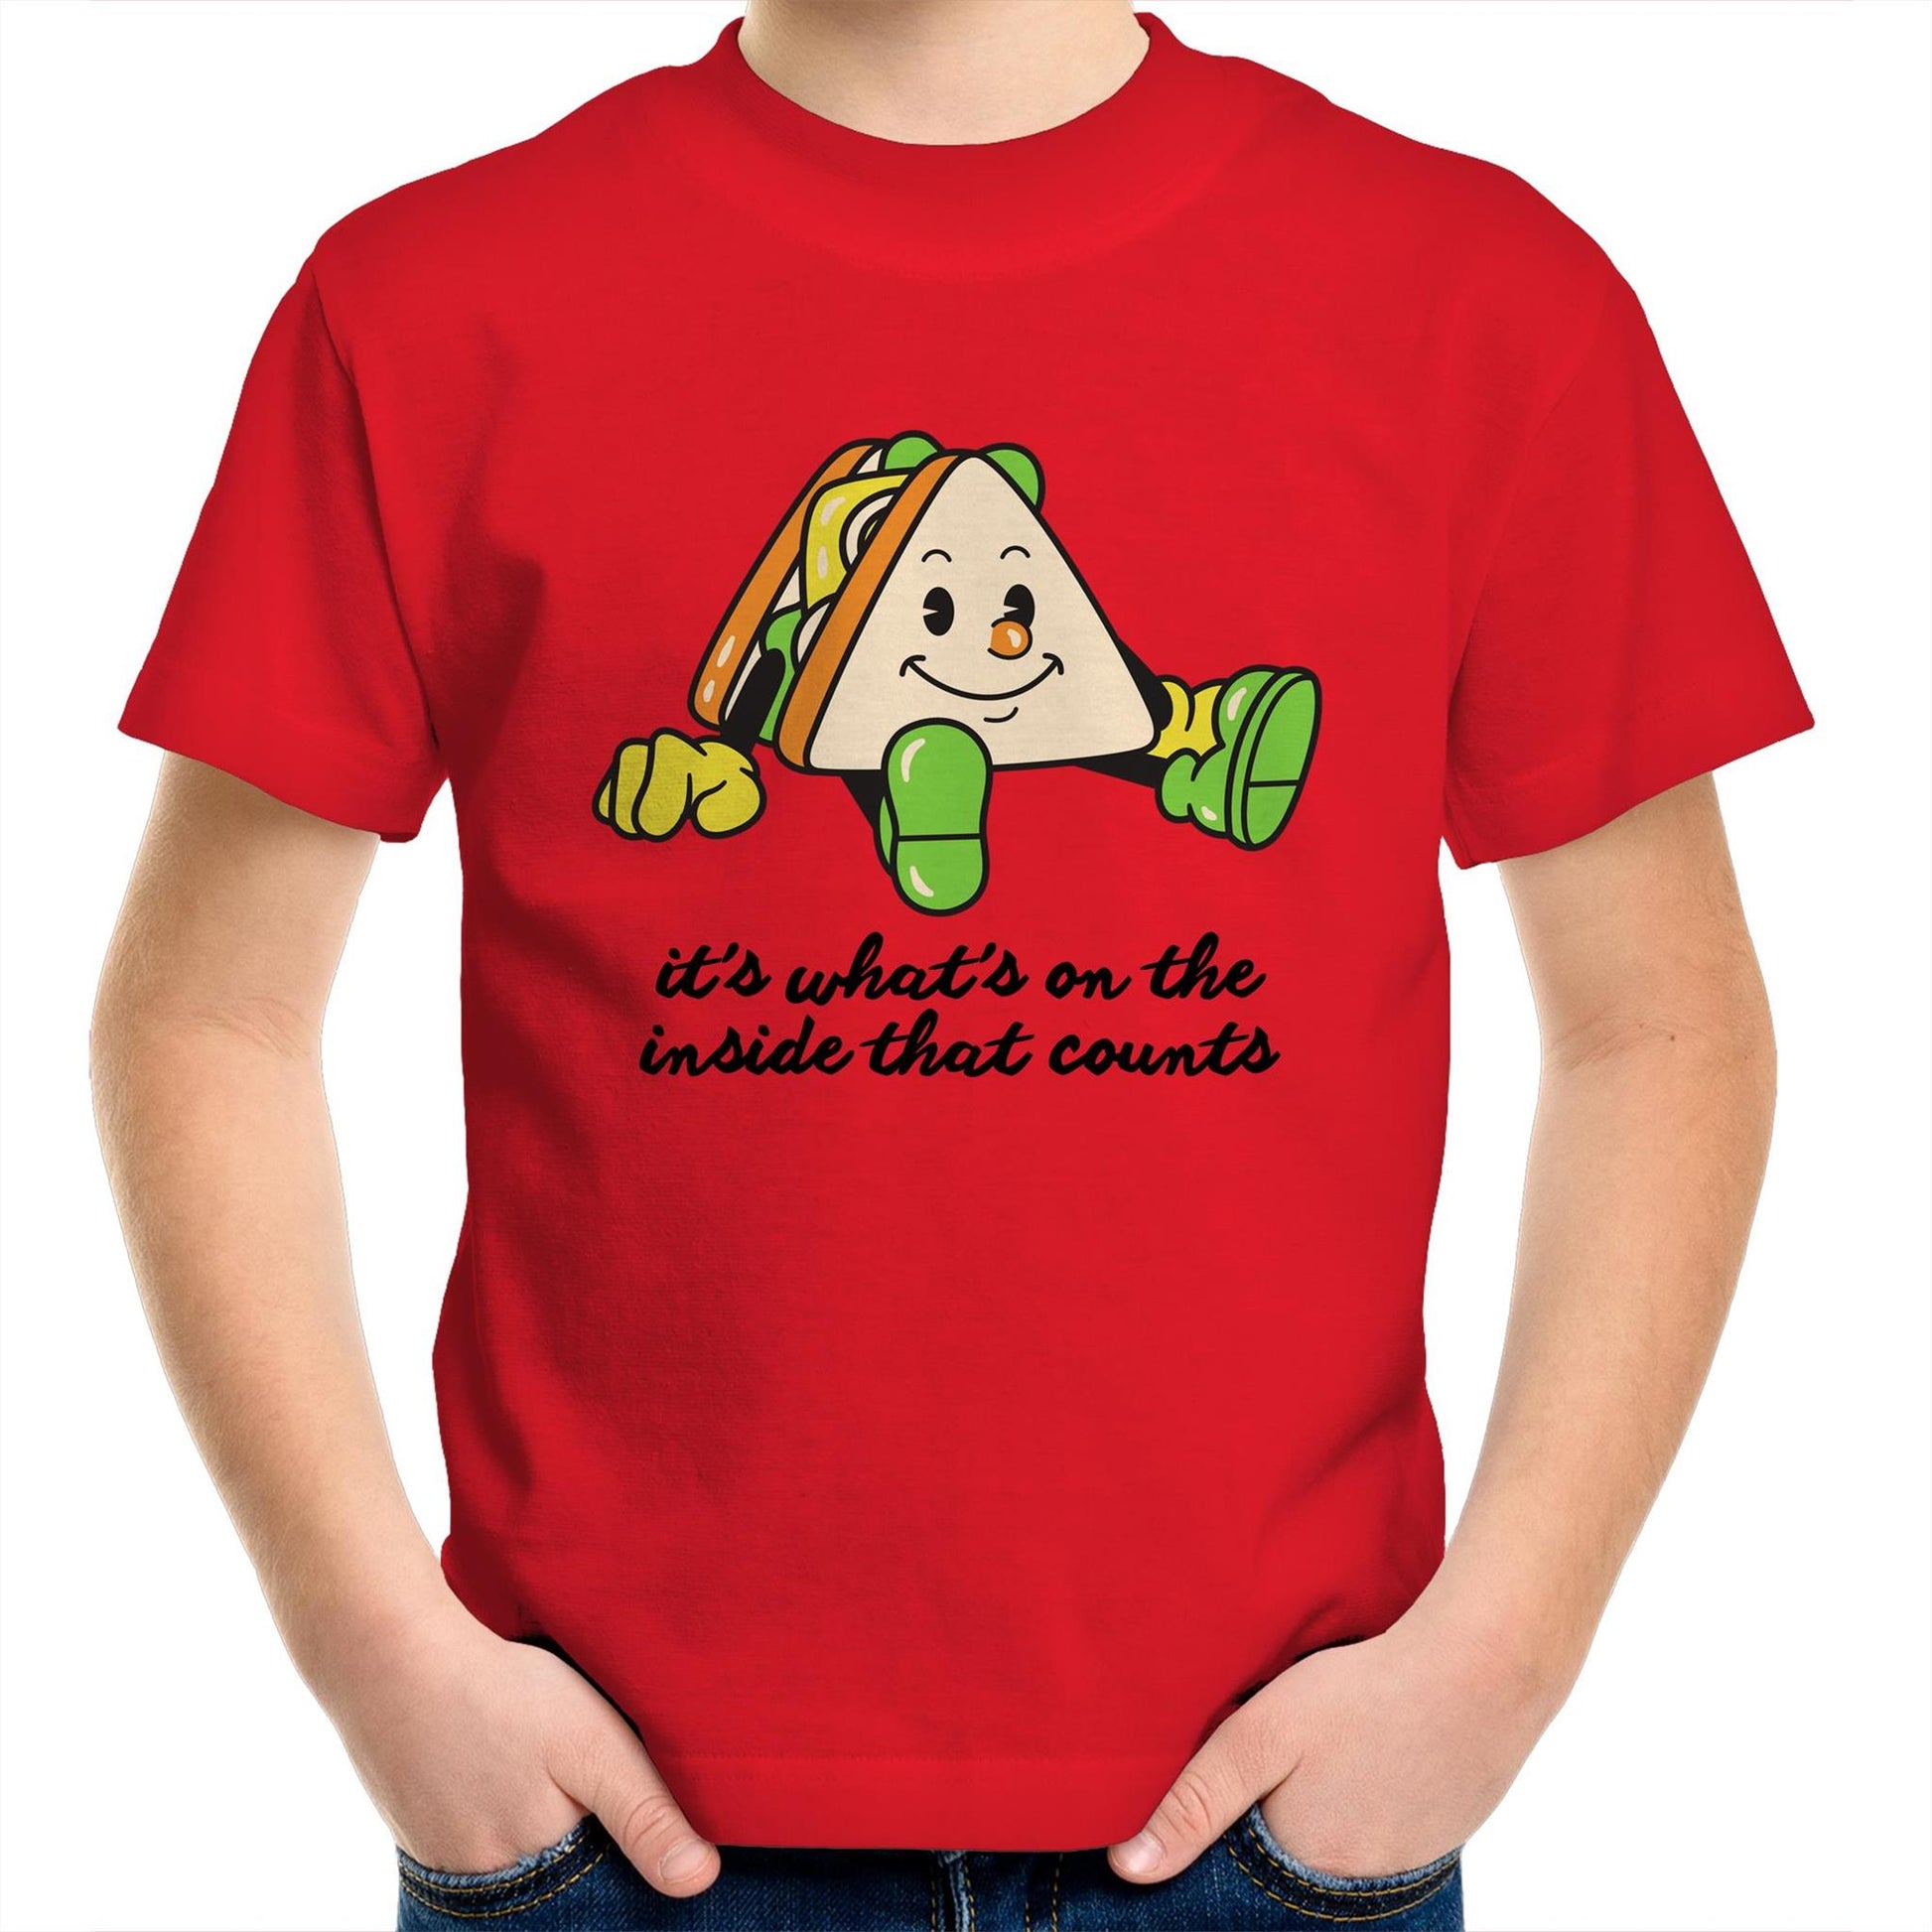 Sandwich, It's What's On The Inside That Counts - Kids Youth T-Shirt Red Kids Youth T-shirt Food Motivation